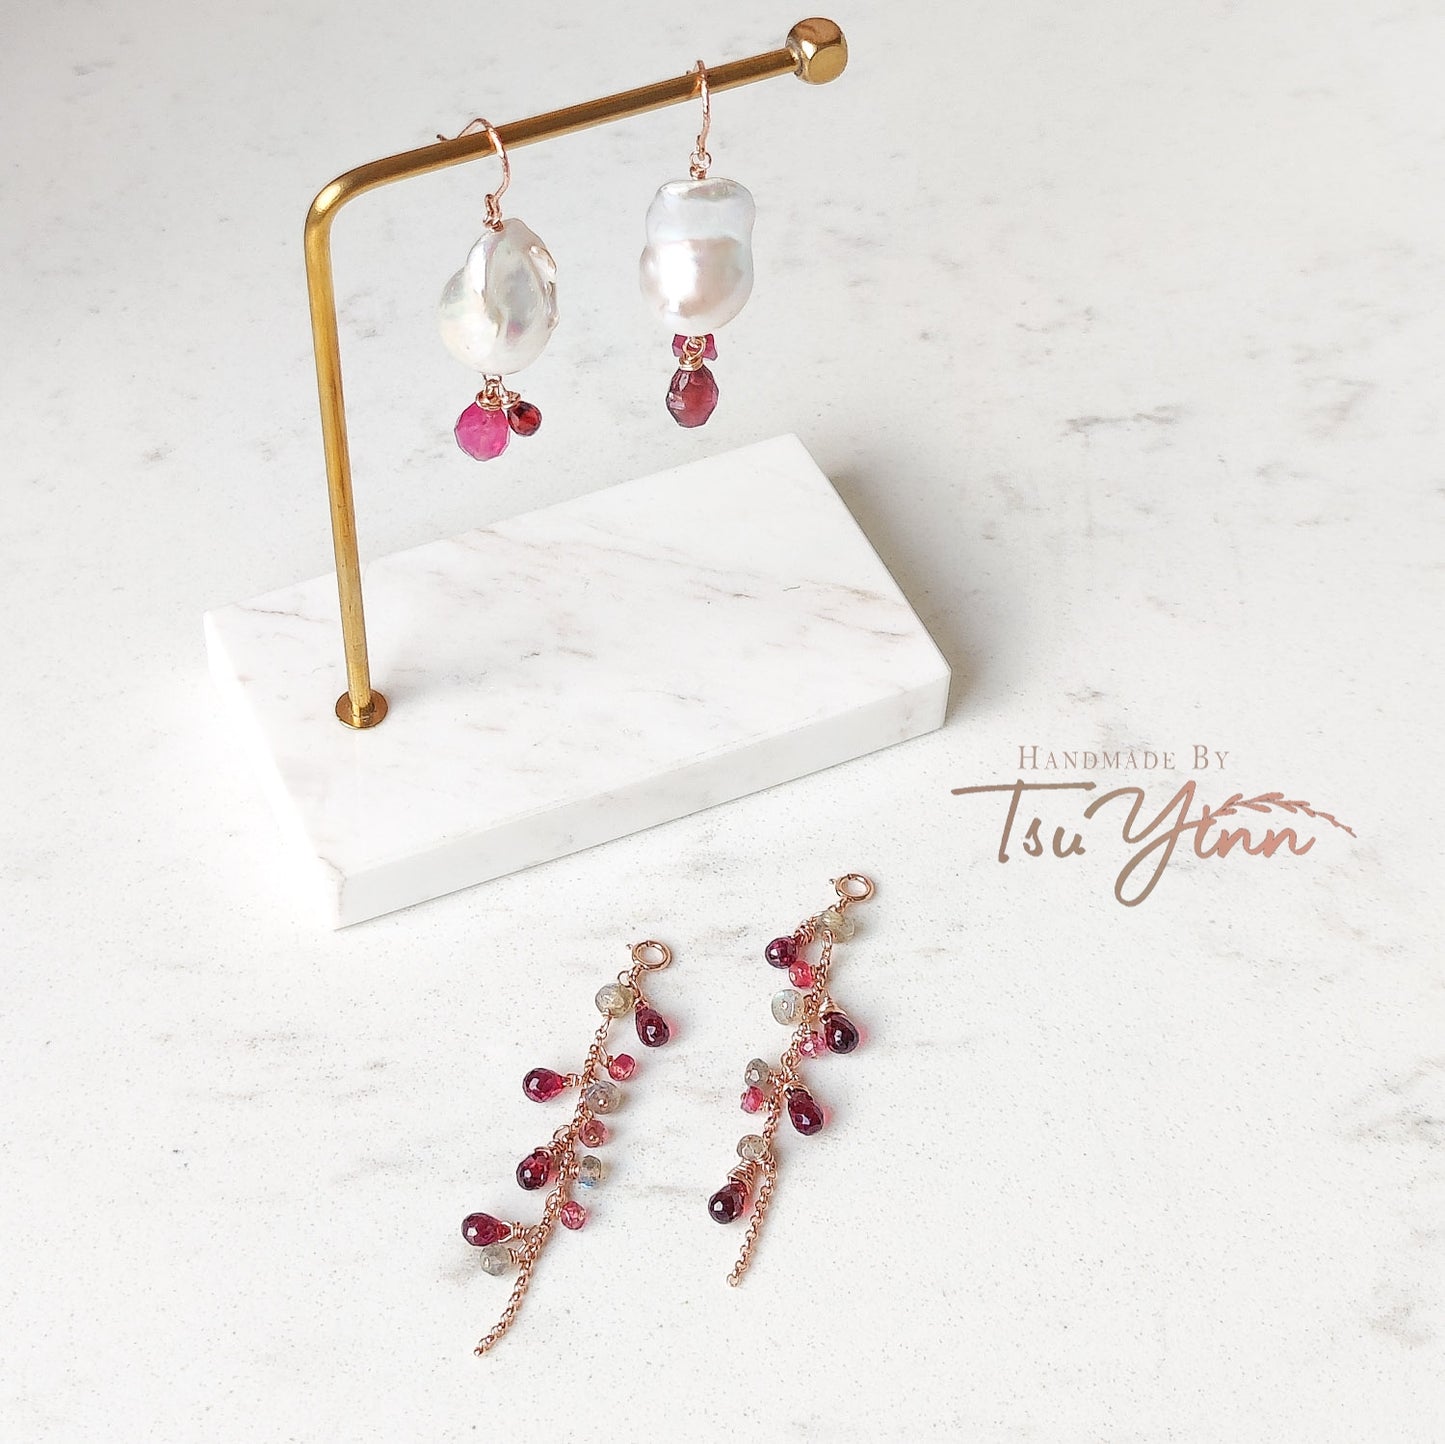 Baroque Pearls with Detachable Dangles in Red/Pink Hues